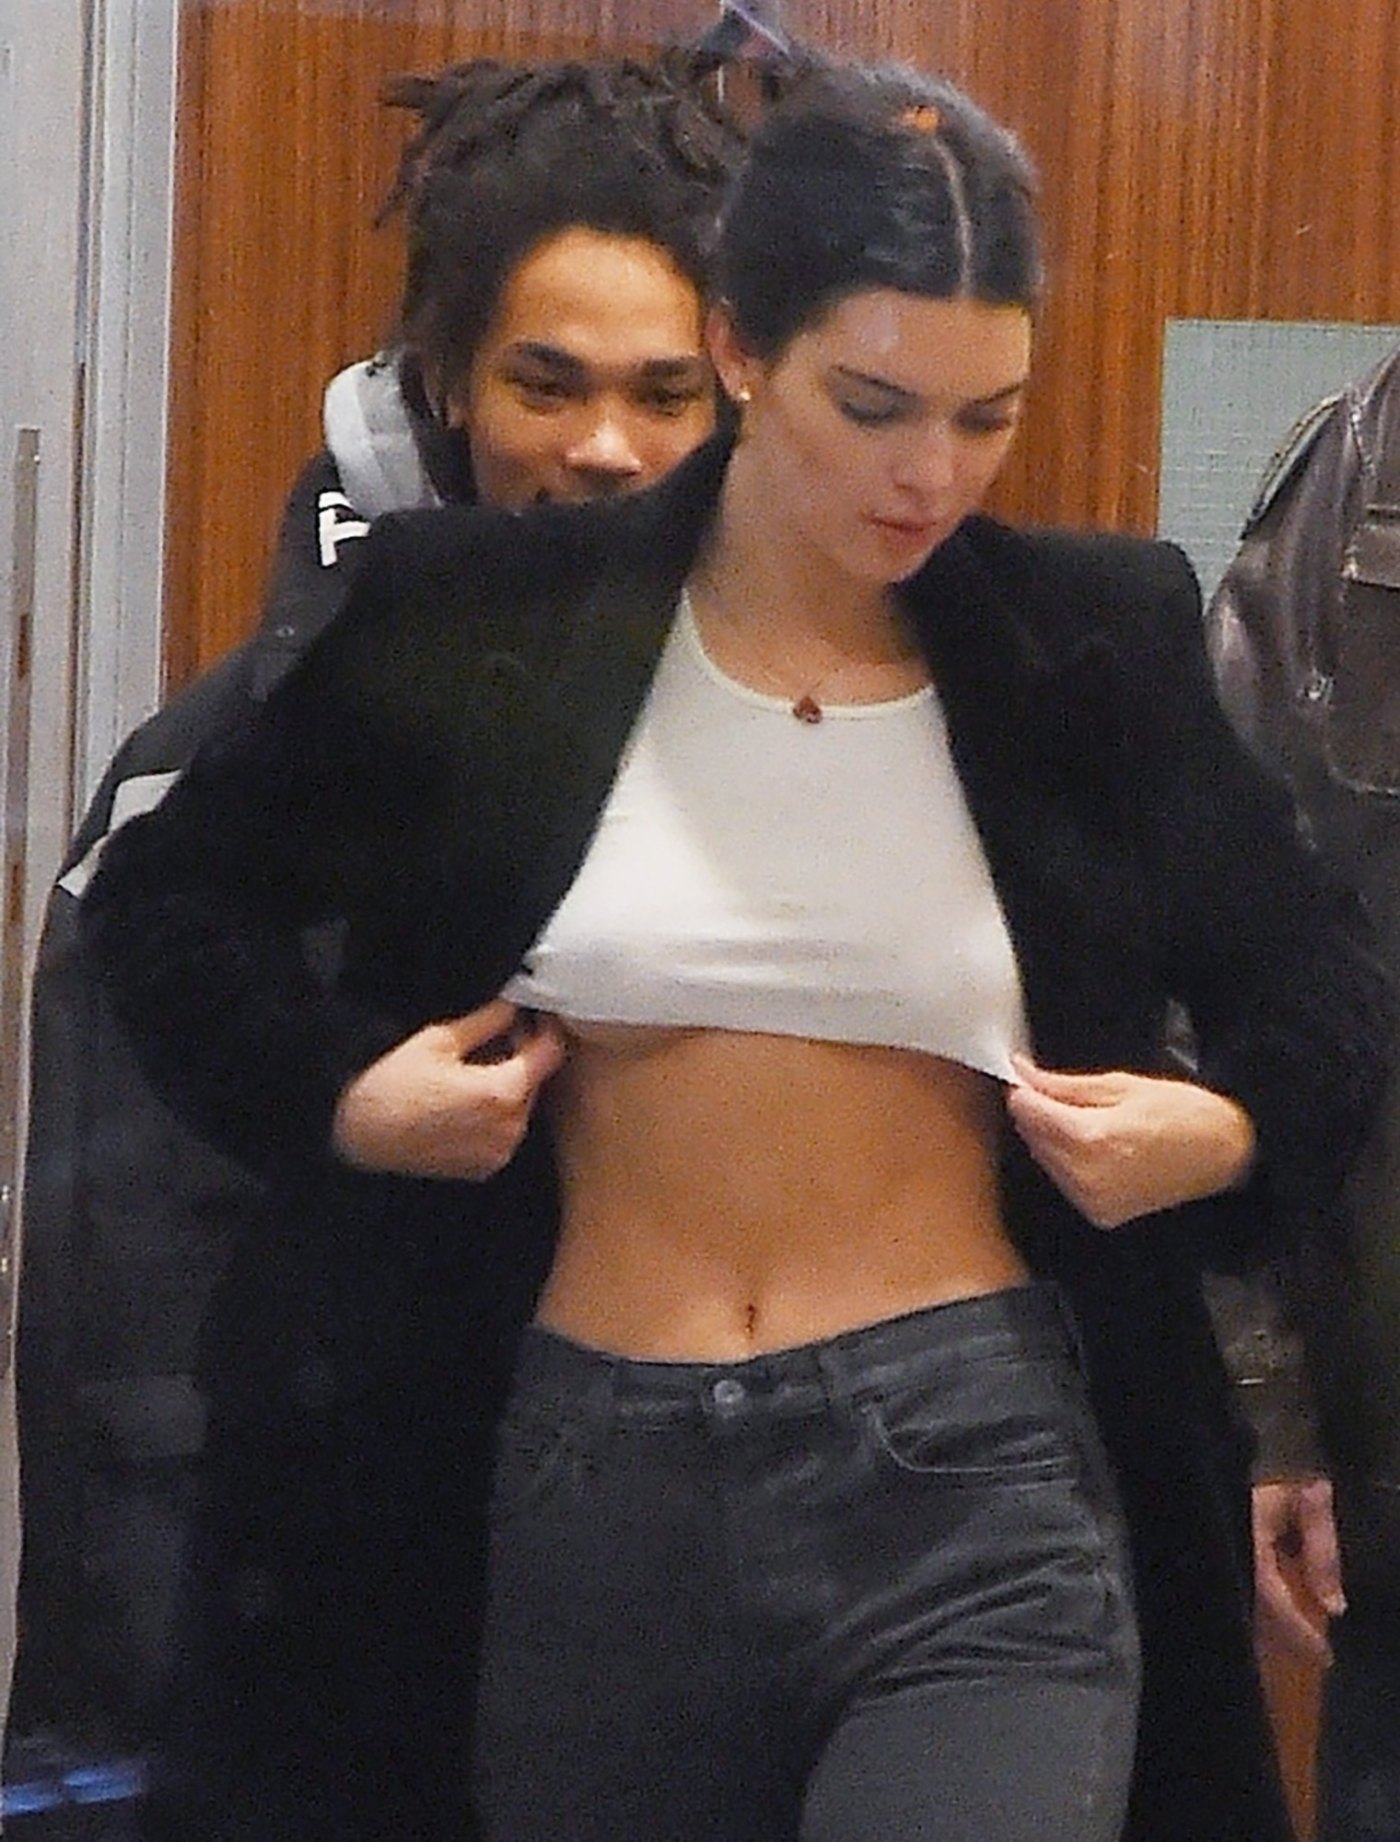 Kendall Jenner Flashes Underboob in NYC With Bella Hadid | Us Weekly